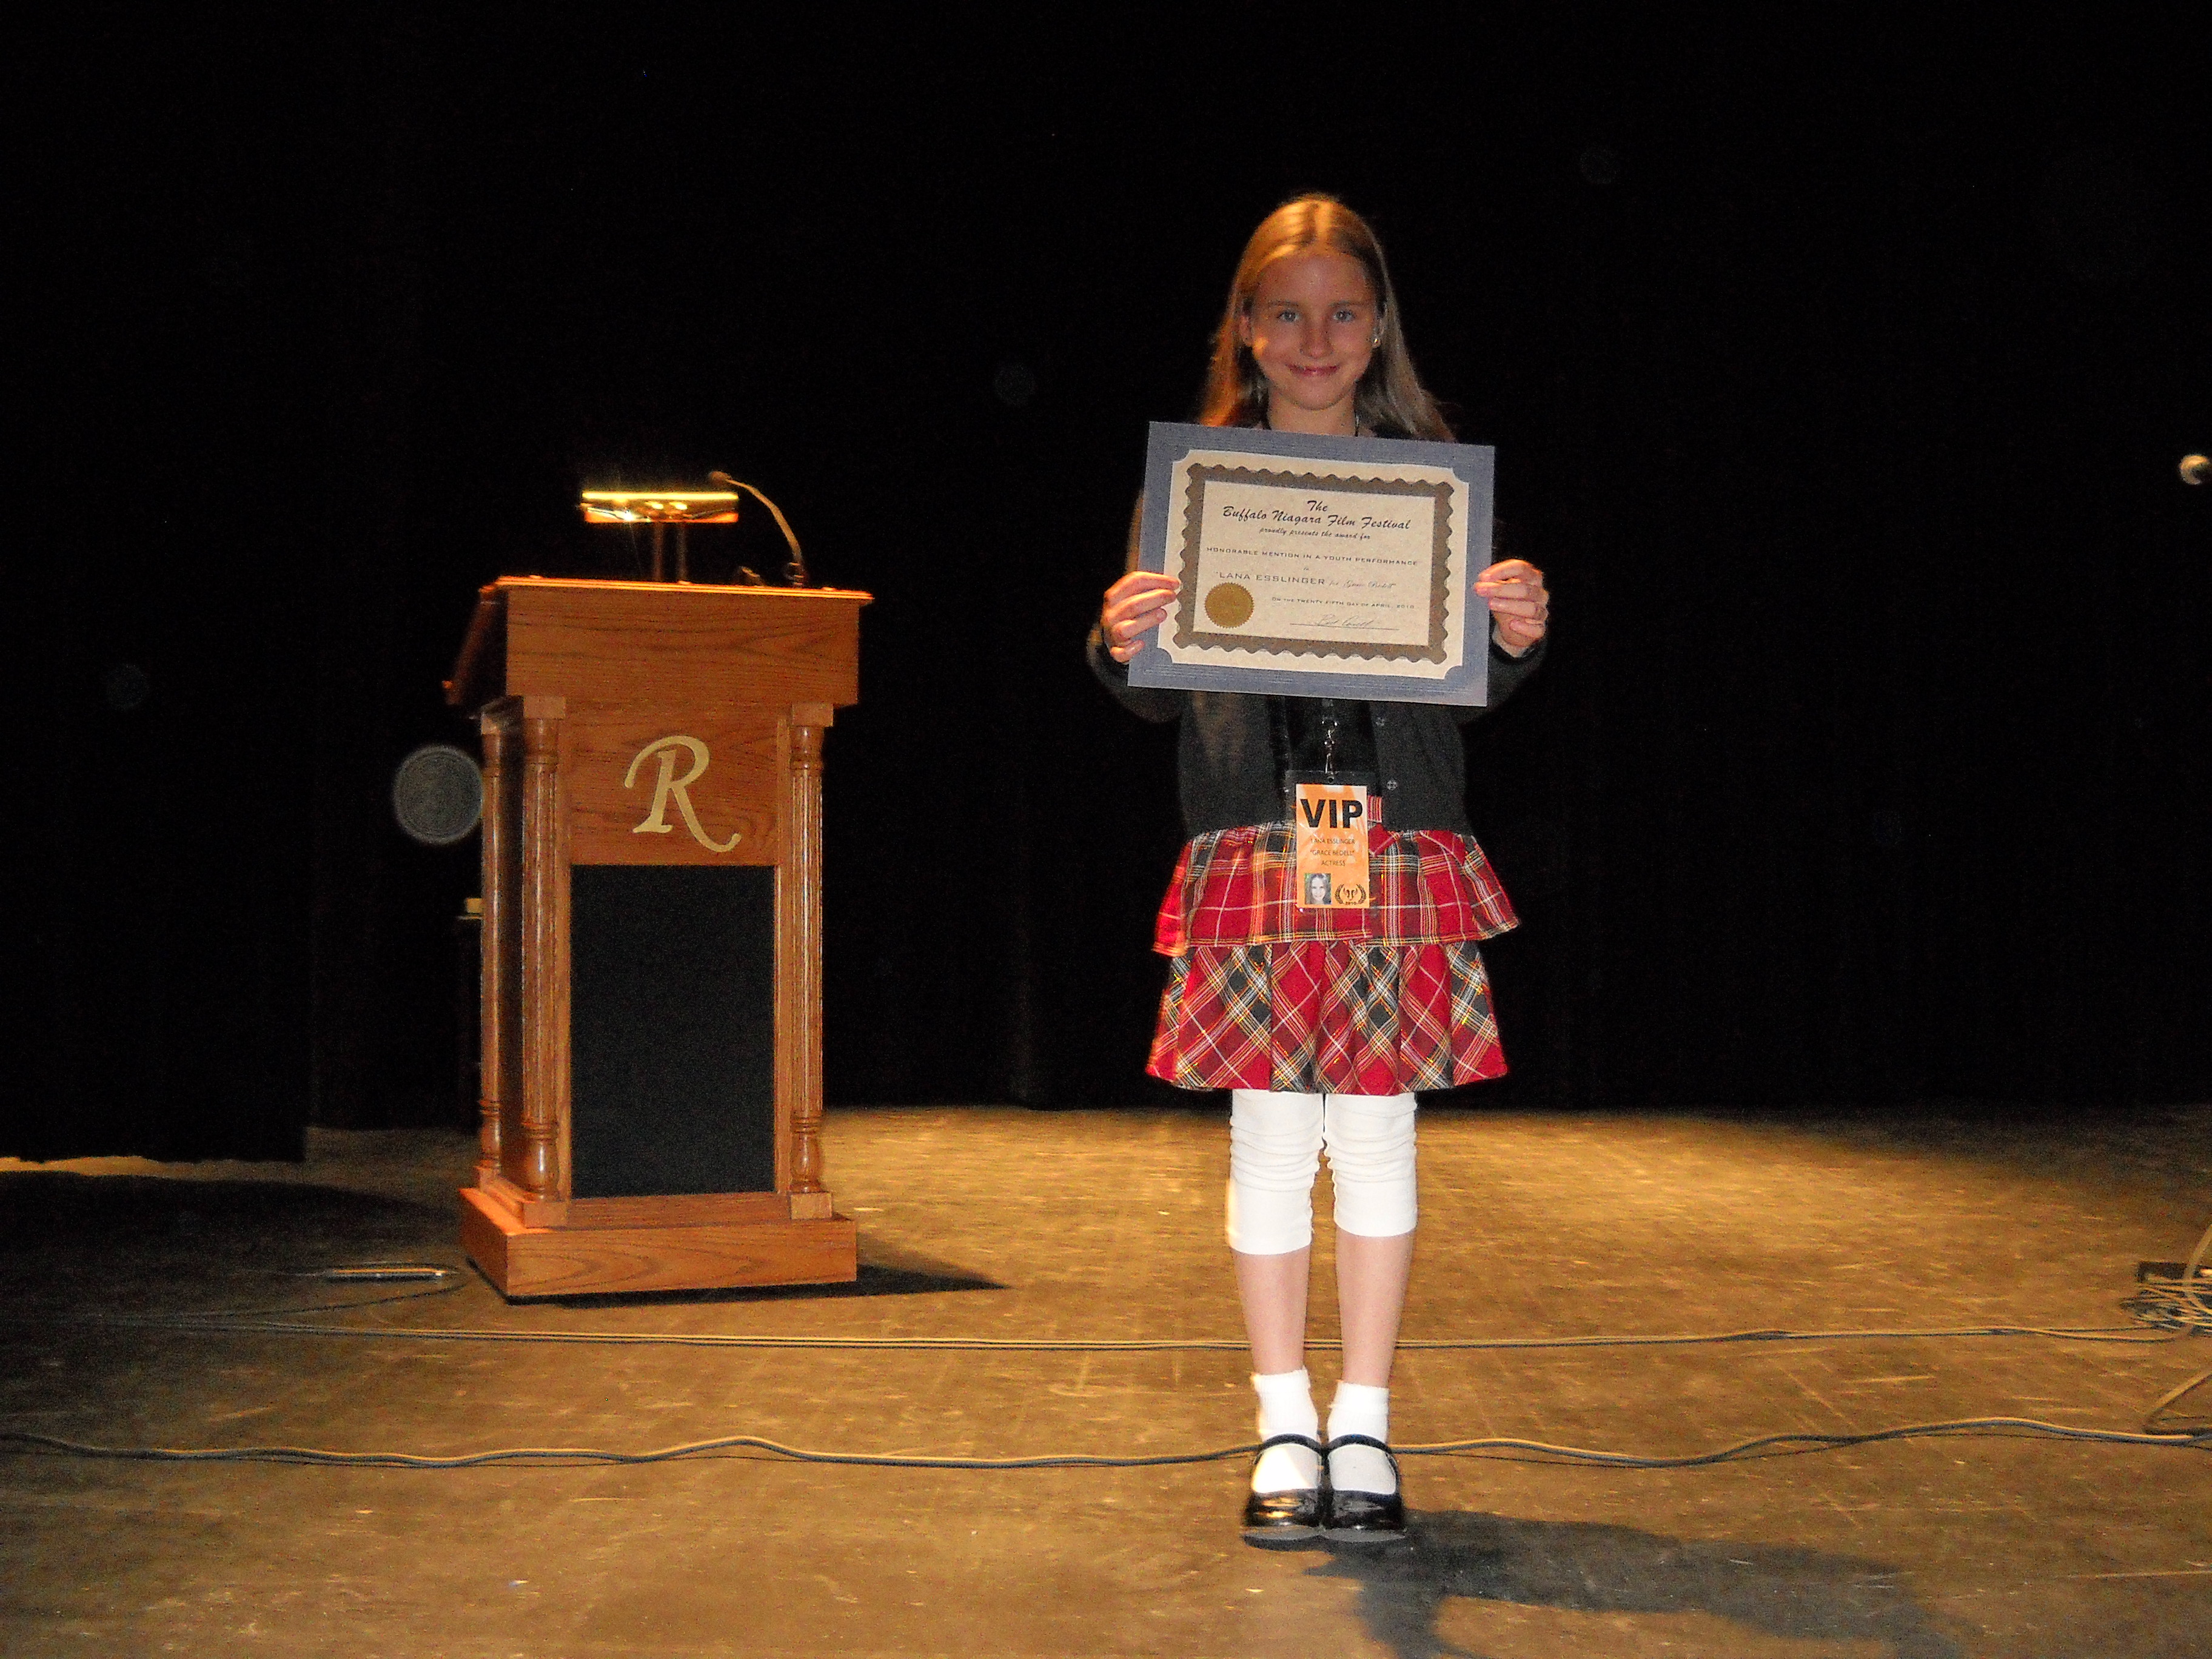 LANA ESSLINGER on stage at the Riviera Theatre accepting her Buffalo/Niagara Film Festival's Youth Performance Award presented to her, for her portrayal of Grace Bedell.